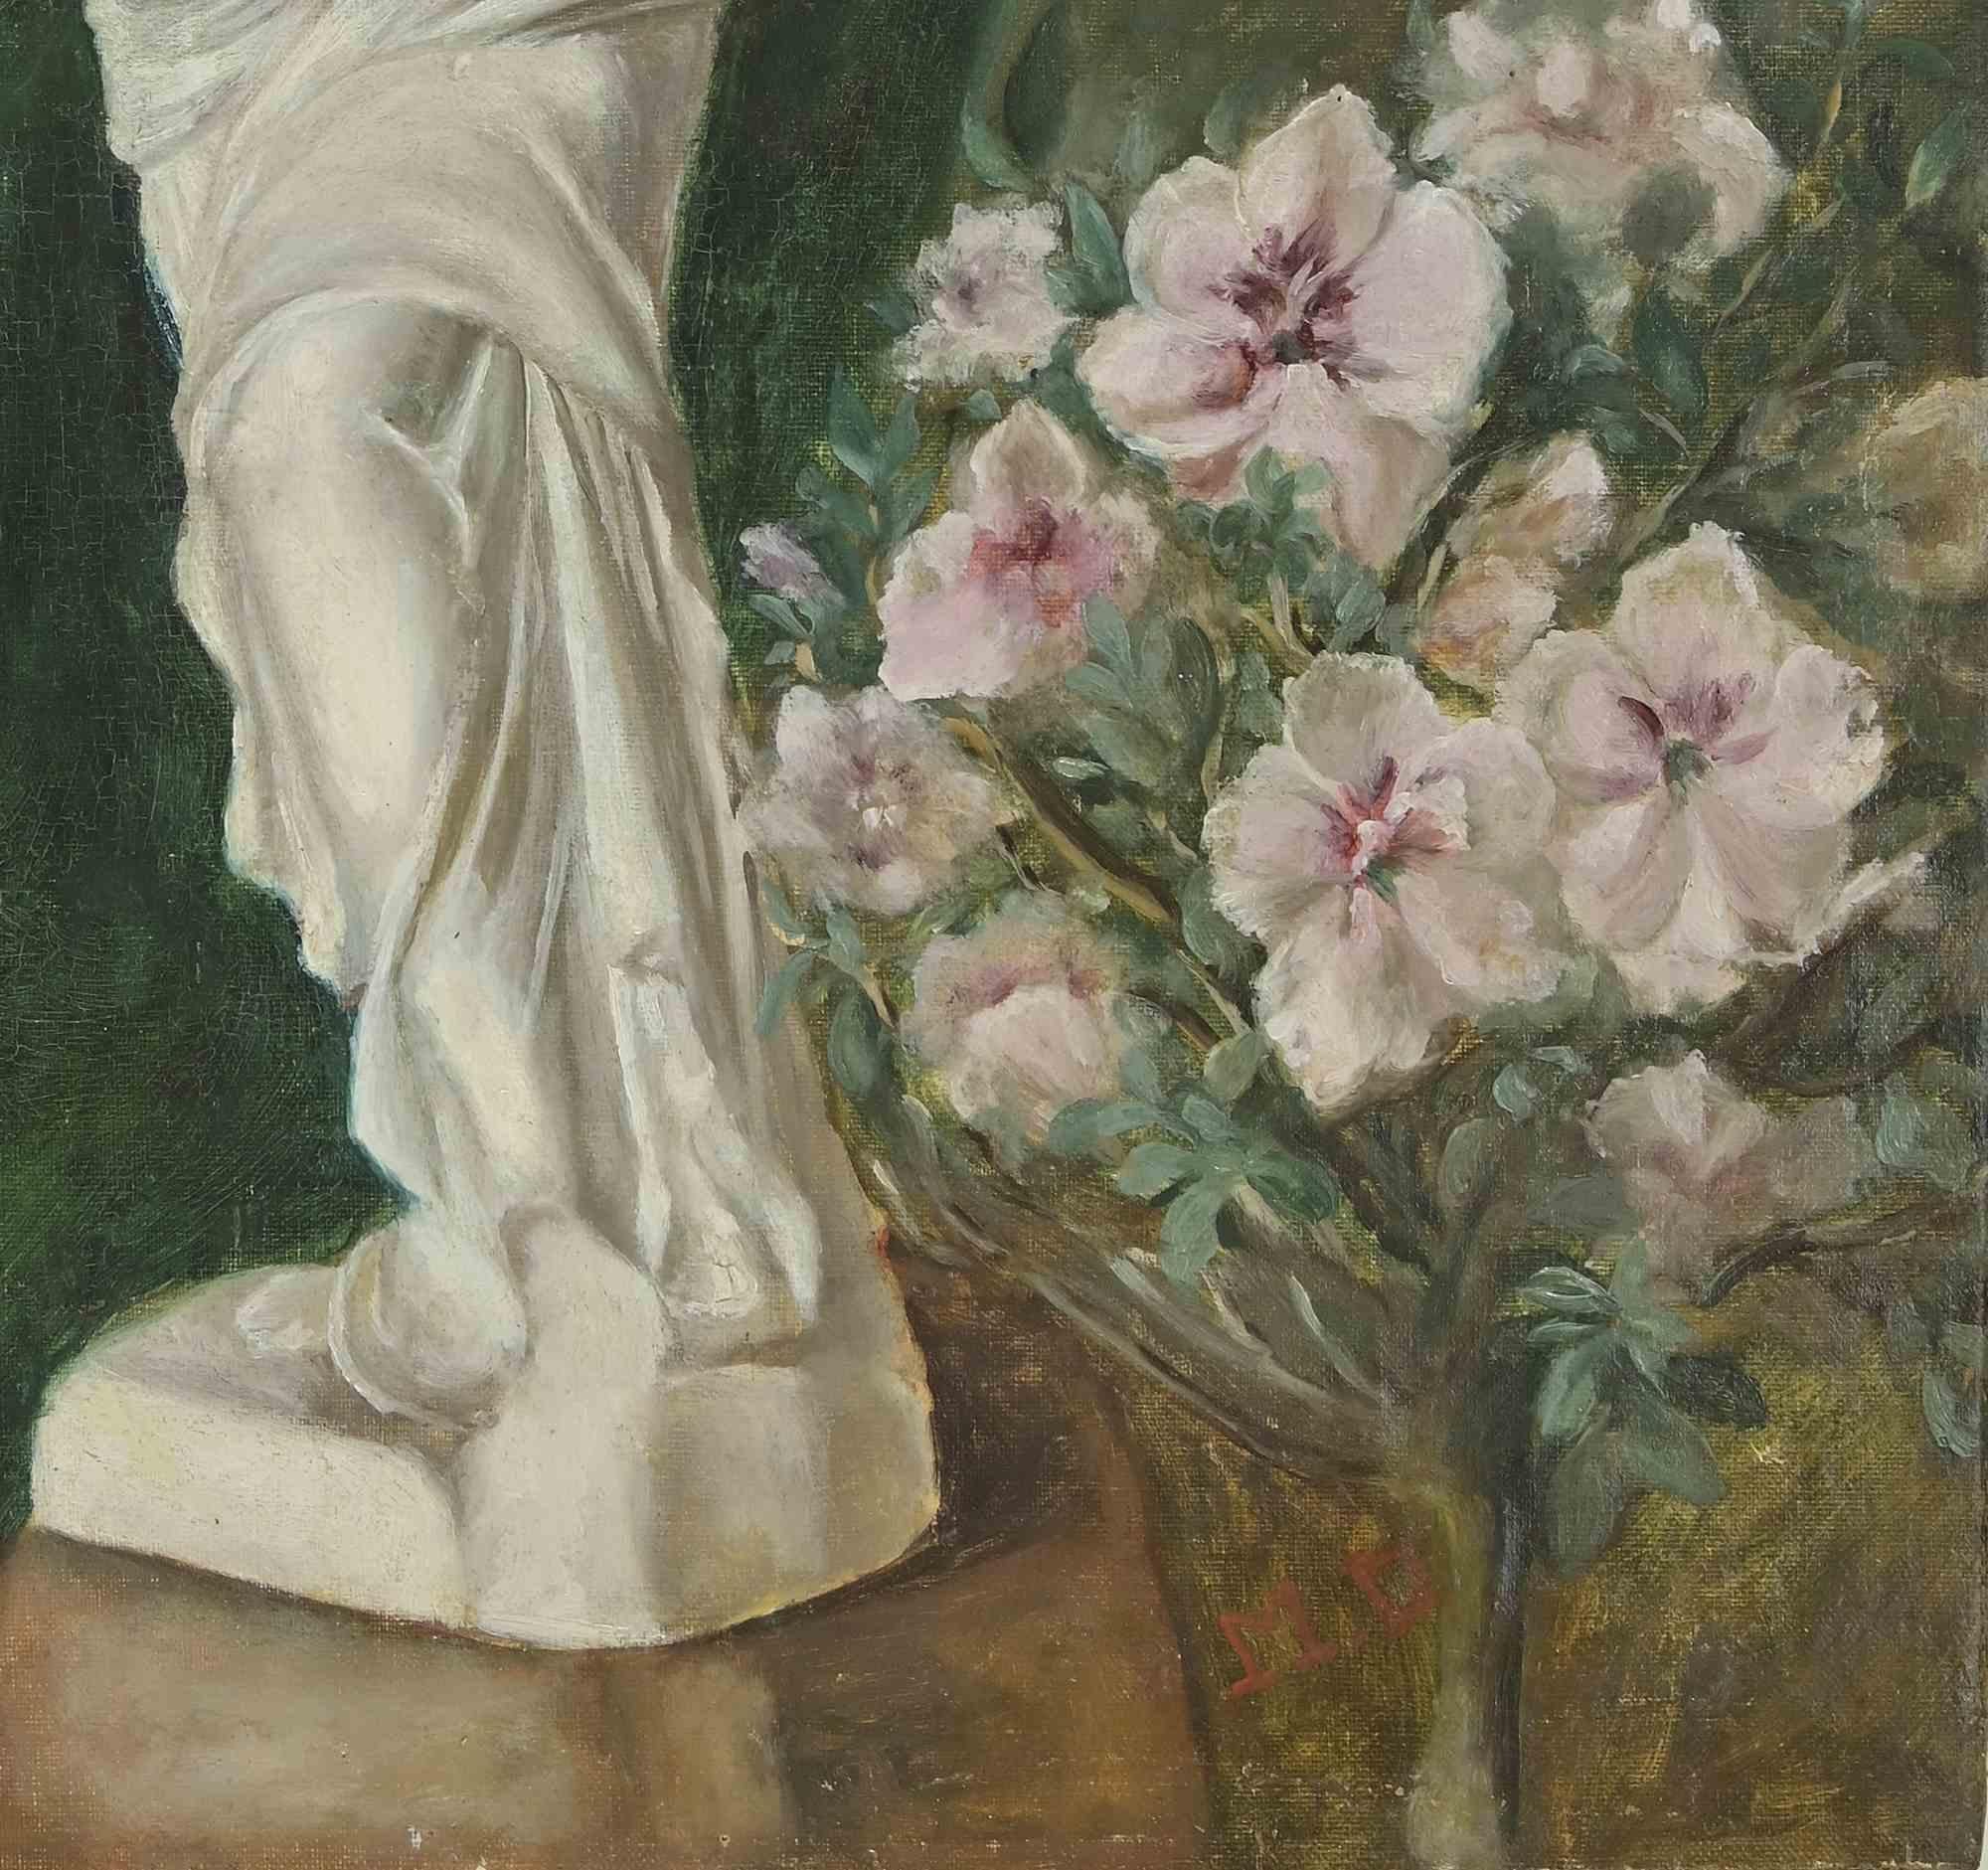 Unknown, Venus de Milo is an artwork realized by Marthe Delacroix (French, 1898–1970) in mid-20th century.

Original oil on Canvas.

Mint Conditions with de-coloring on margins.